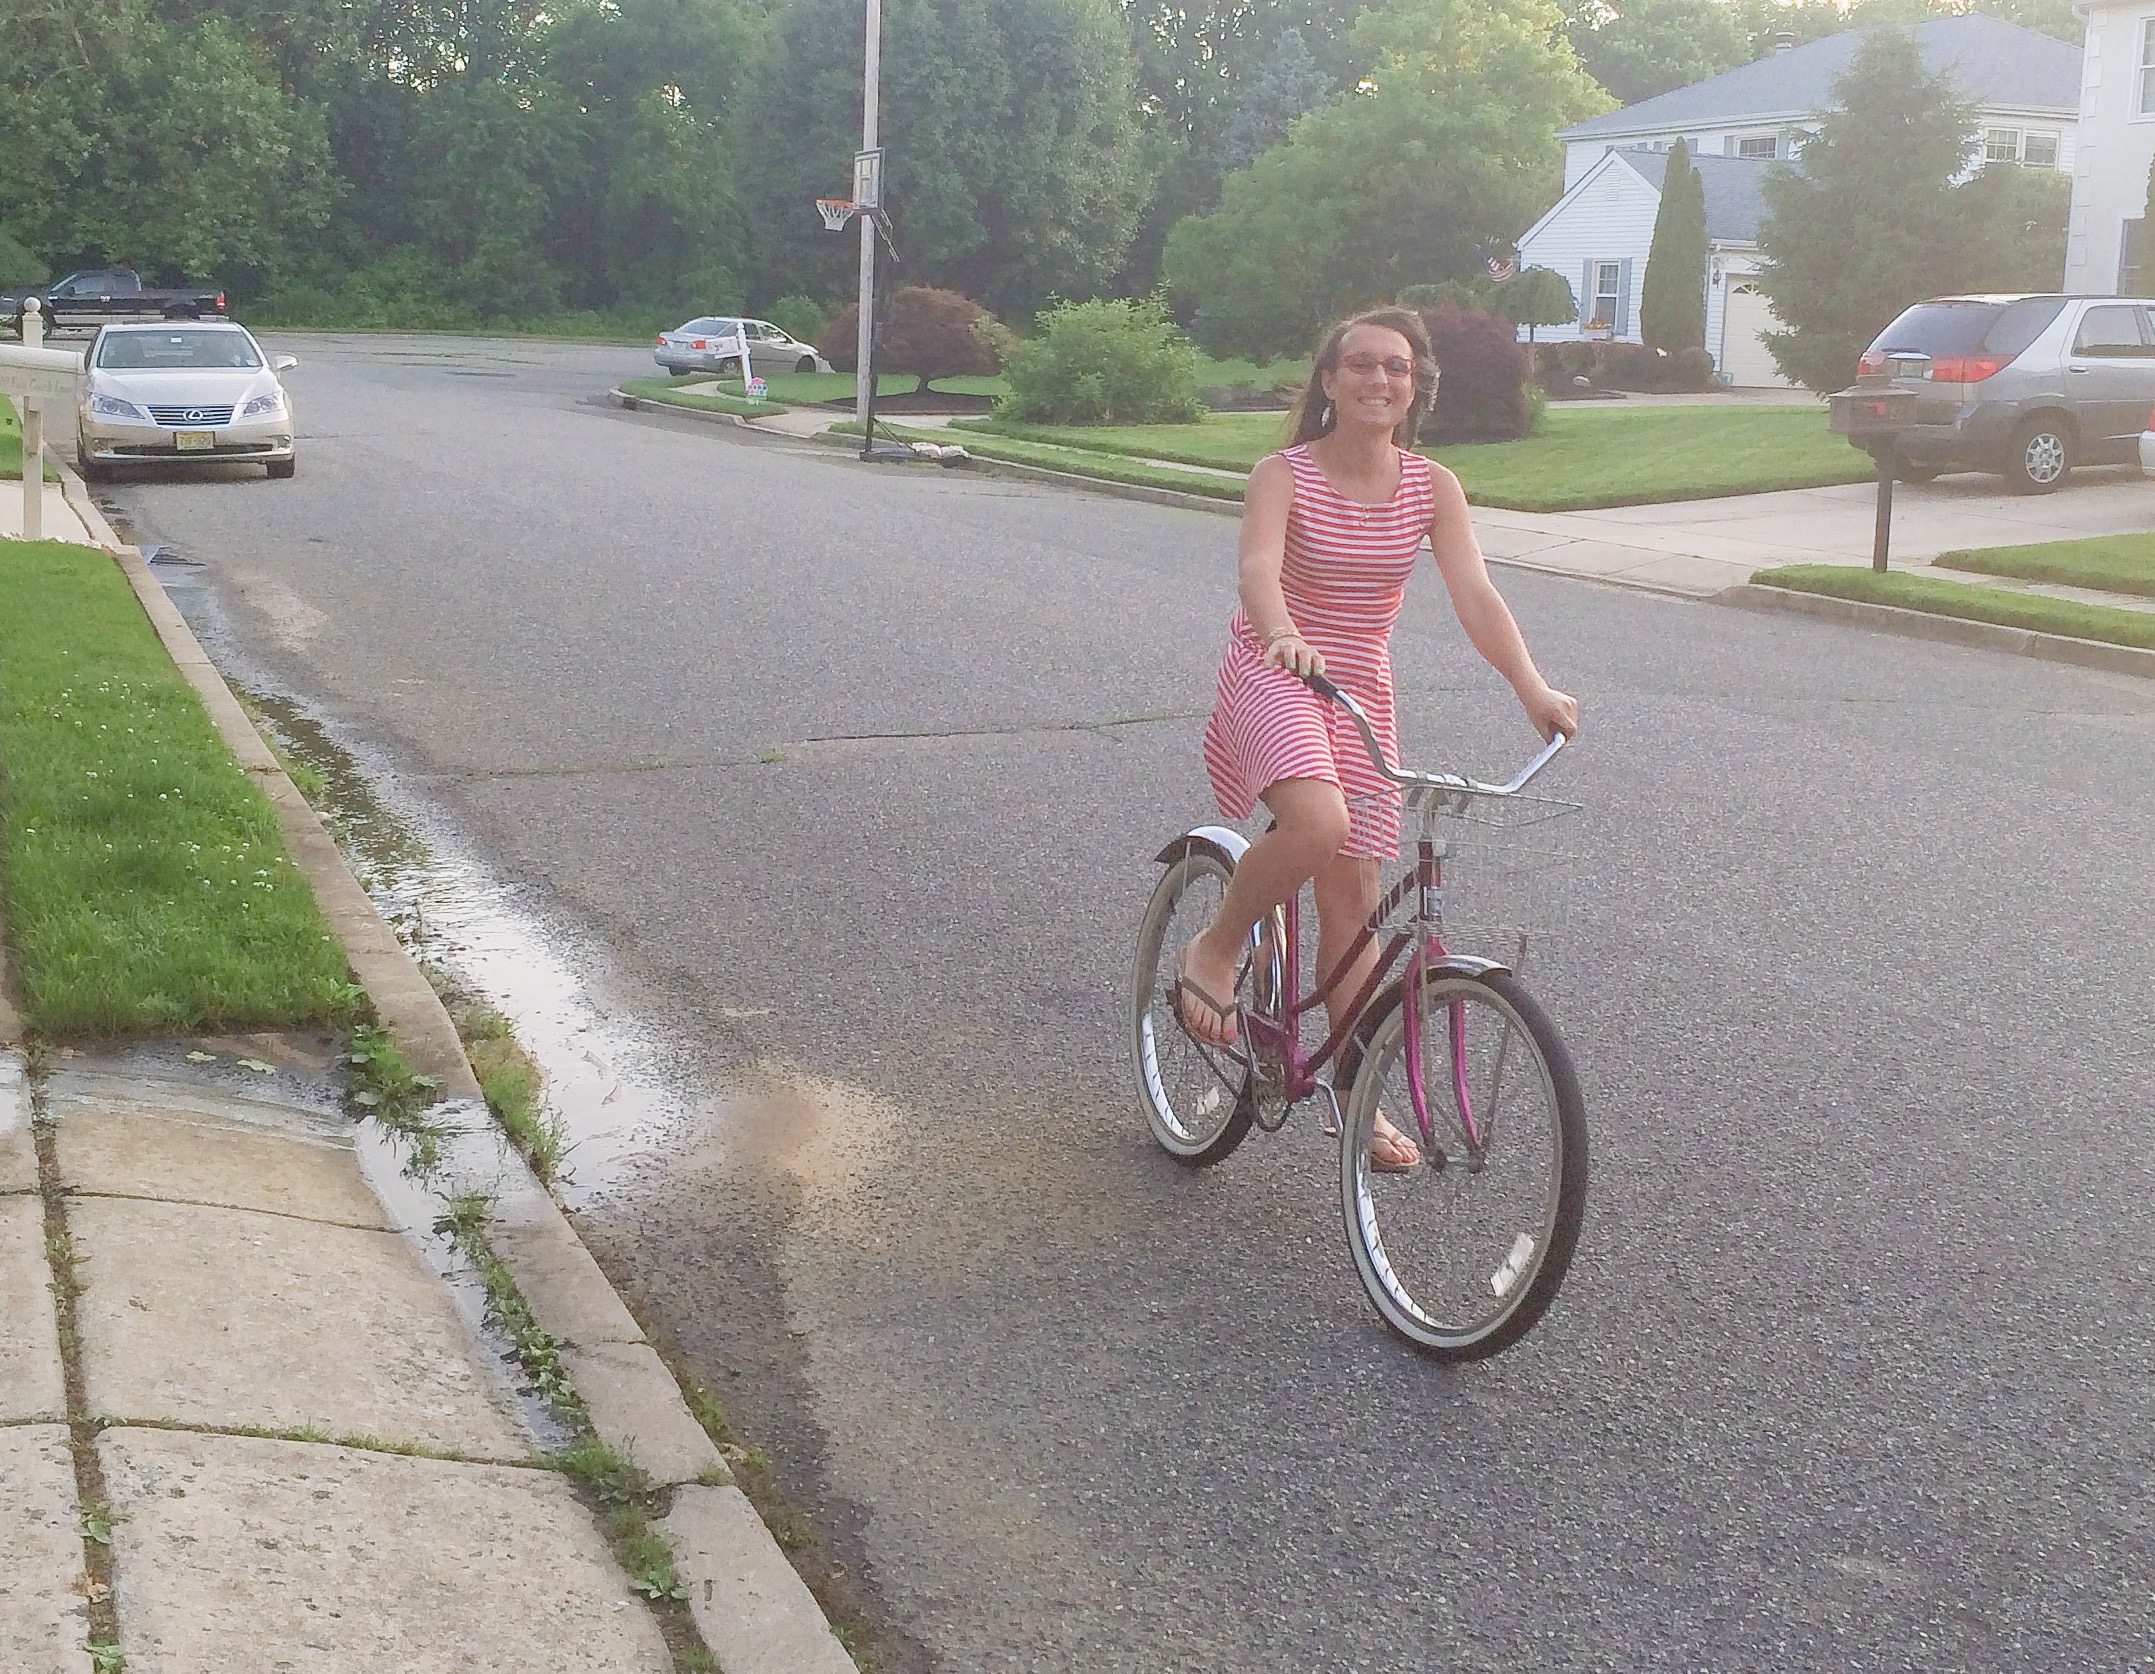 Someone gave my mom a bike and took it for a spin around the block while I was home with them. 